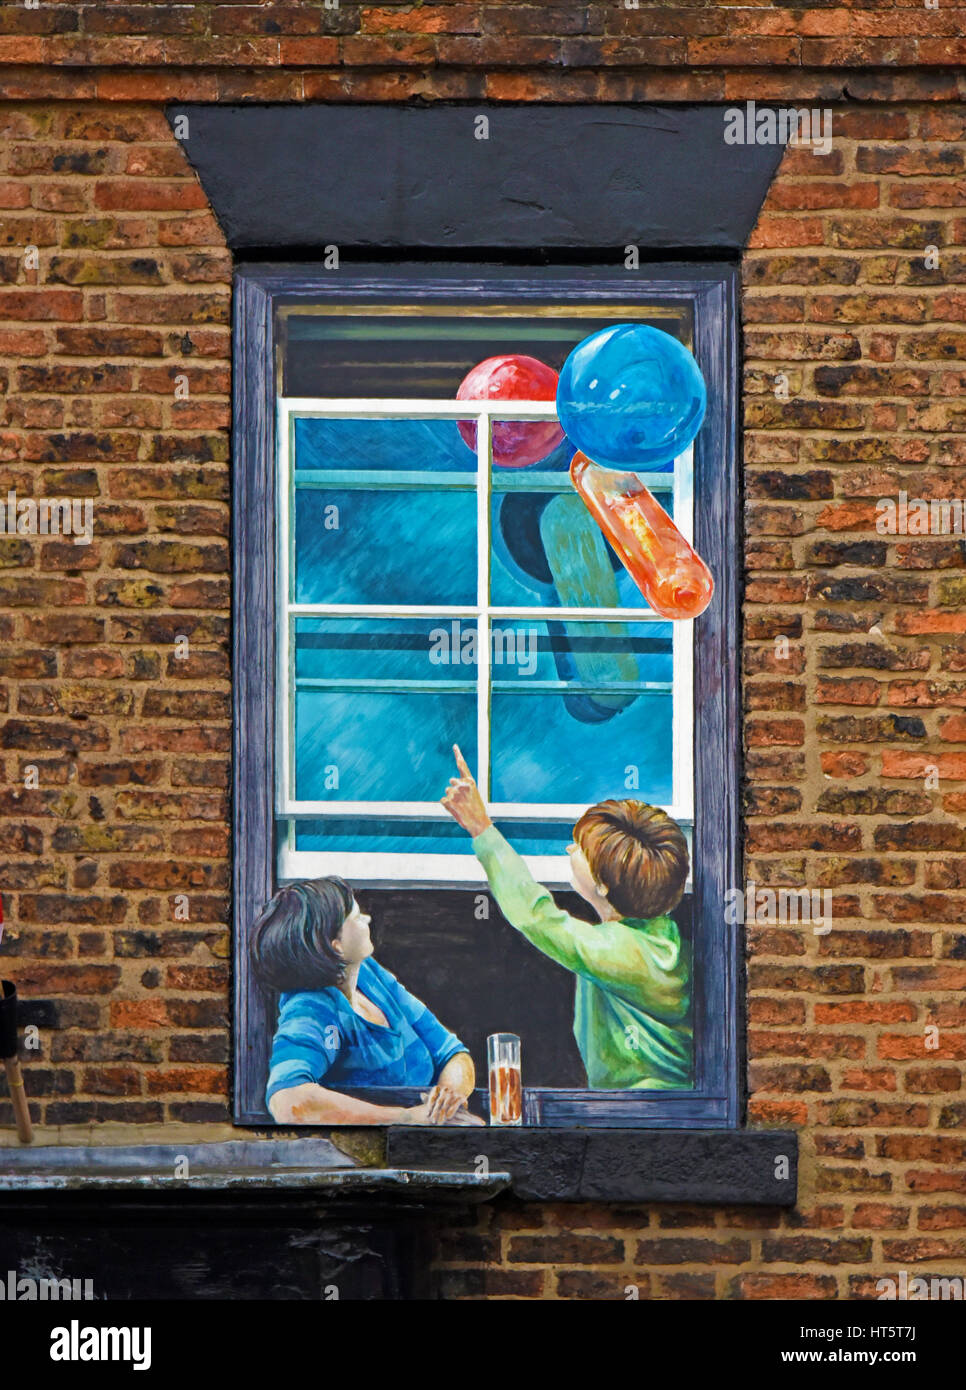 Mother and child with balloons. Trompe-l'oeil painted window. Knaresborough, North Yorkshire, England, United Kingdom, Europe. Stock Photo